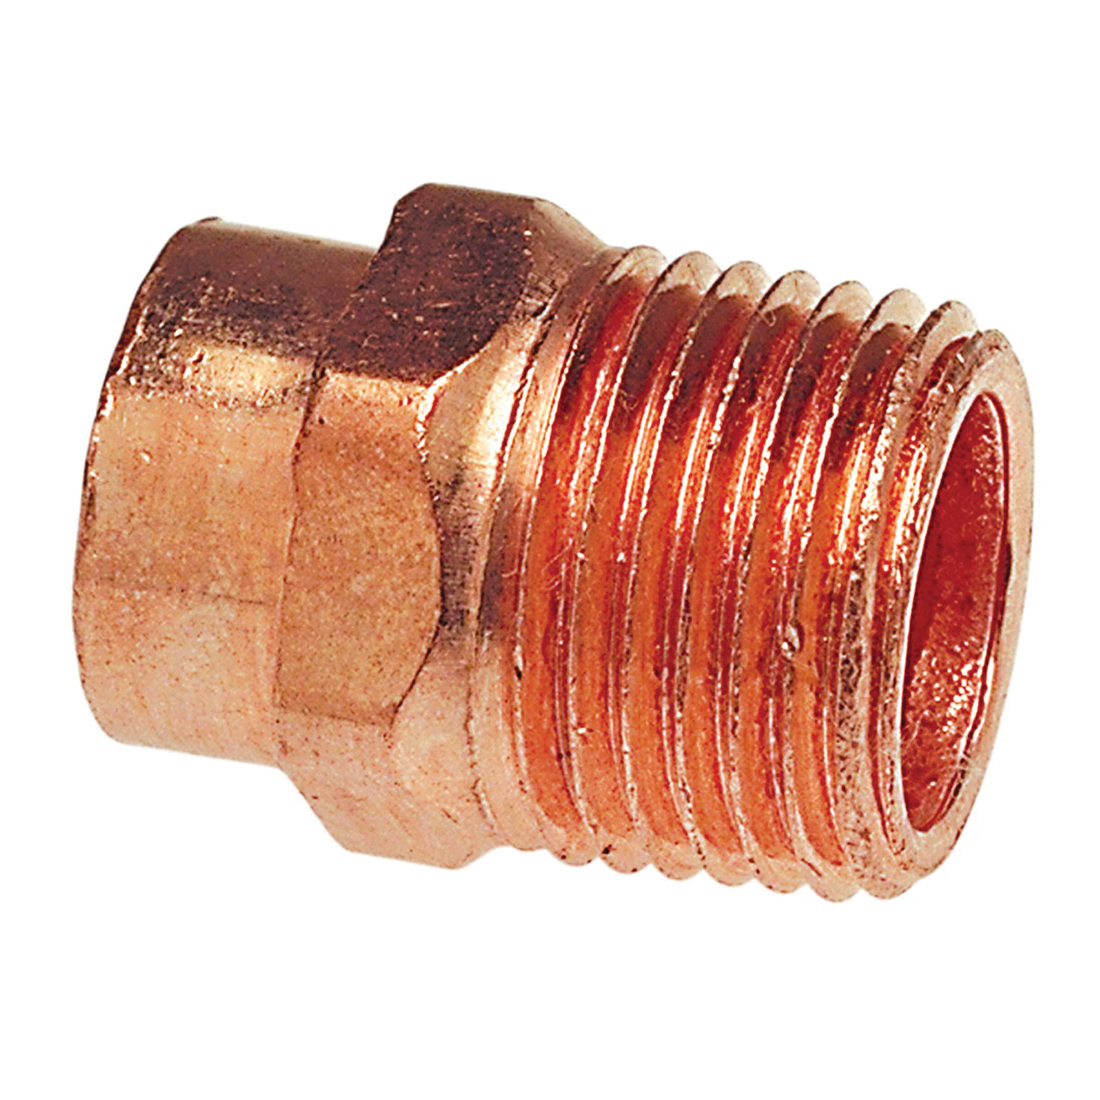 NIBCO® 9031200 604R Adapter, 3/4 x 1/2 in Nominal, C x MNPT End Style, Copper, Domestic